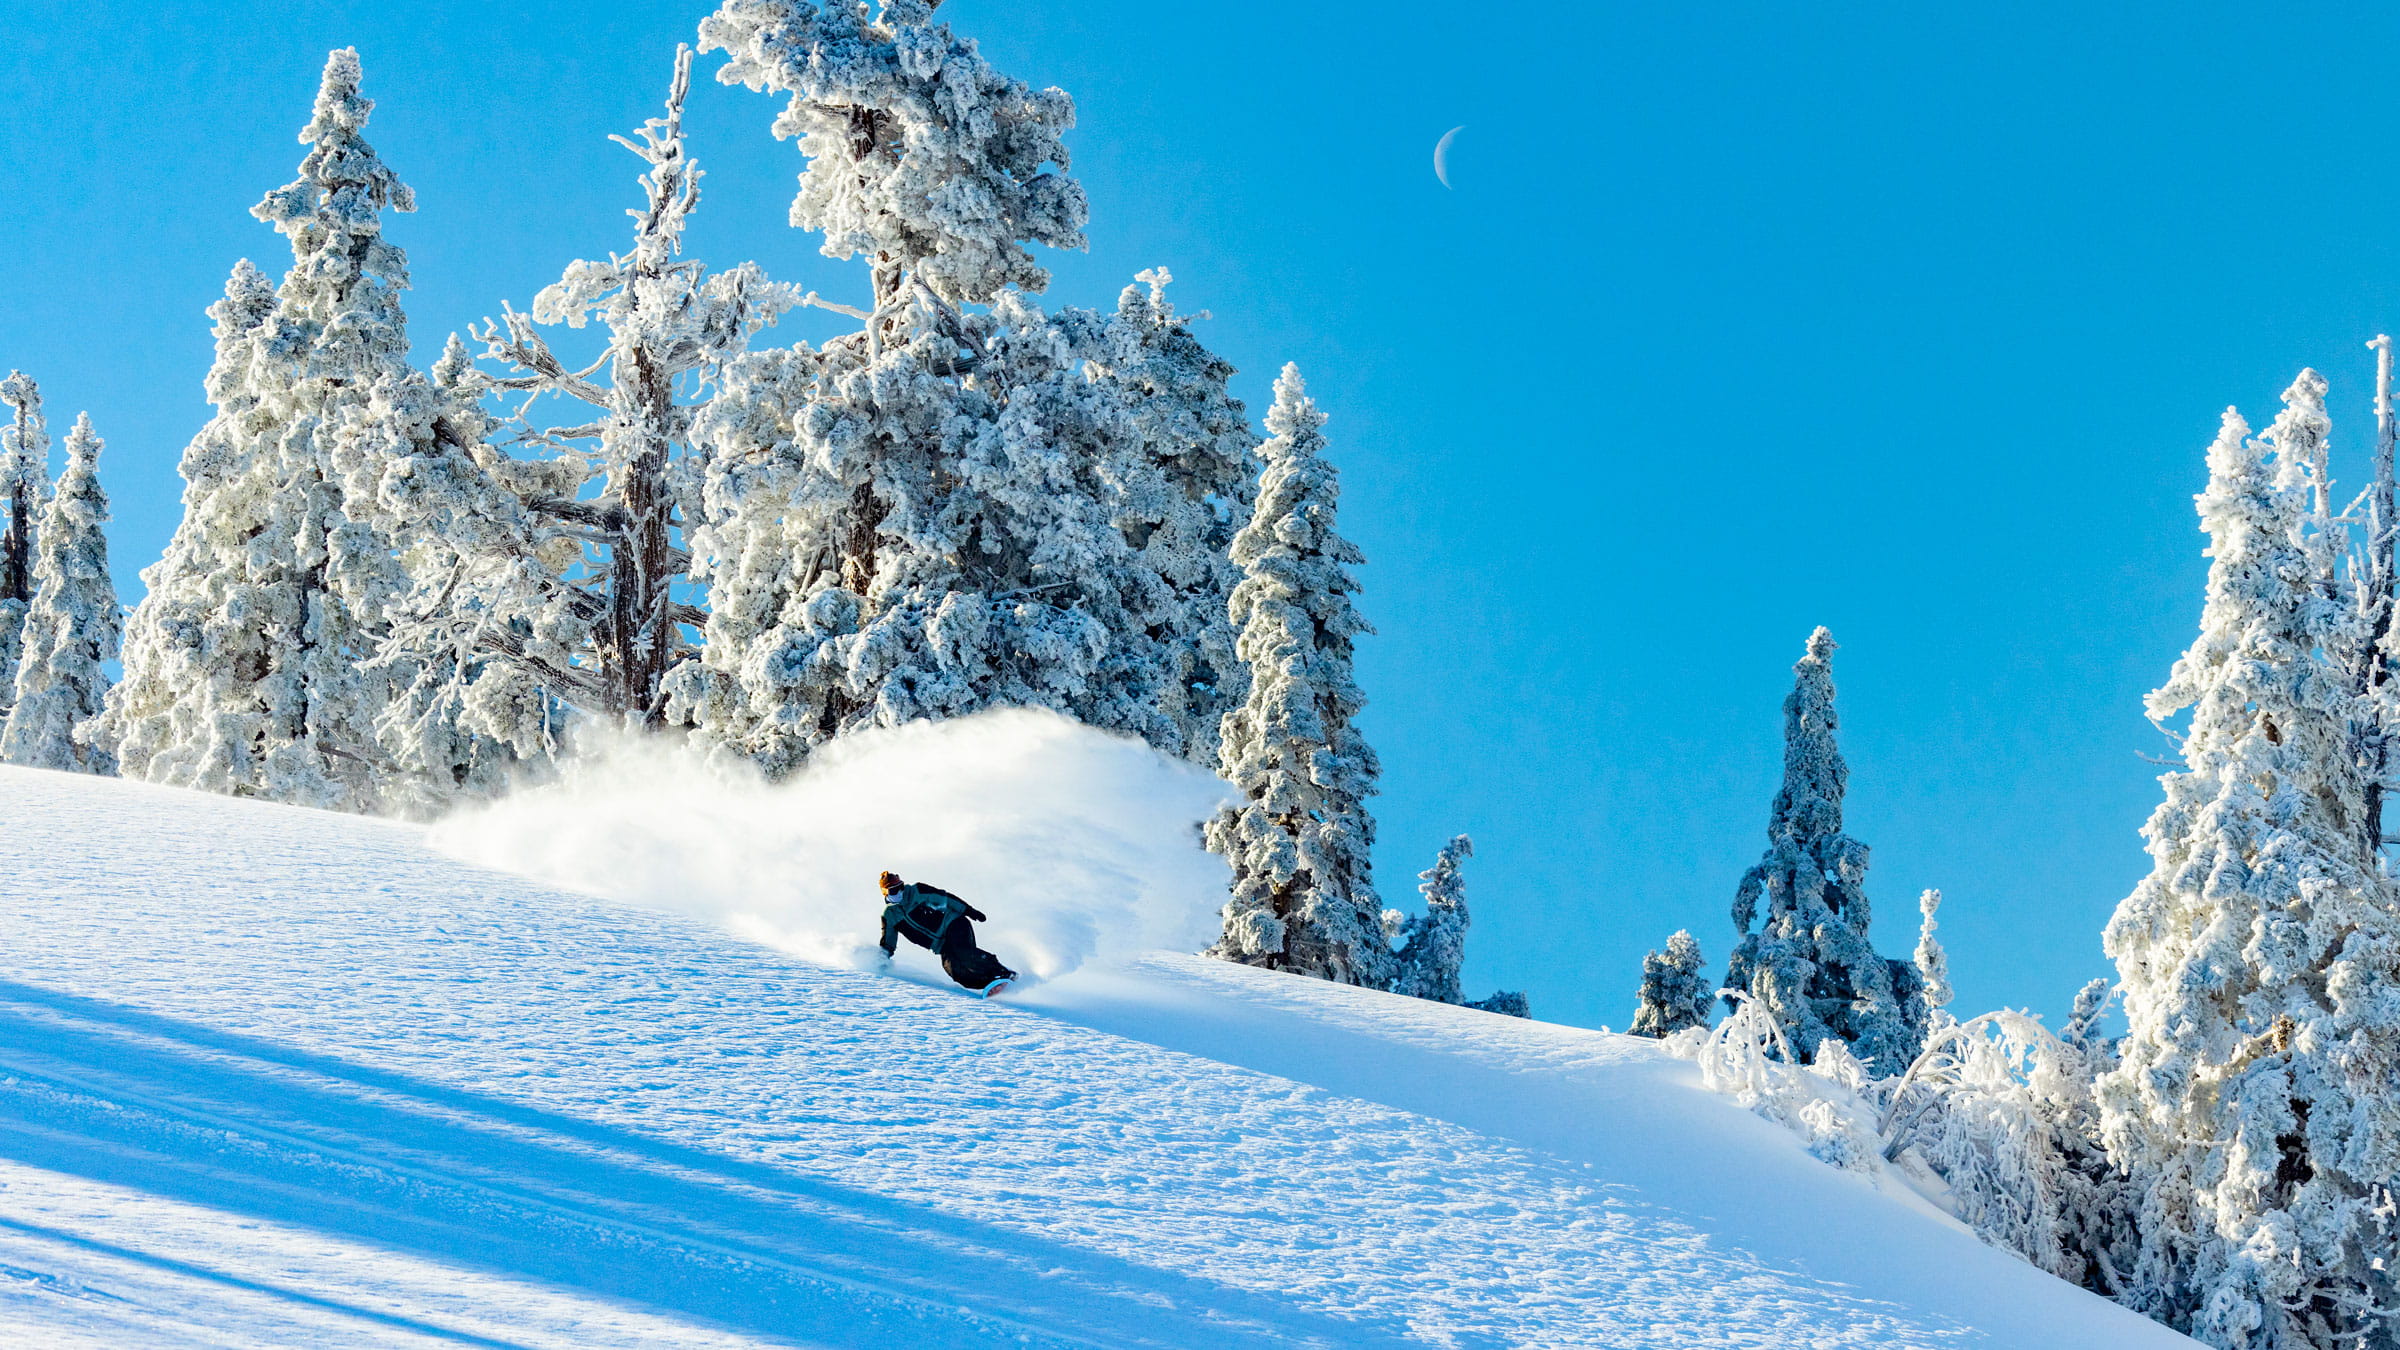 Bluebird day at BBMR during the winter months after a powerful snow storm